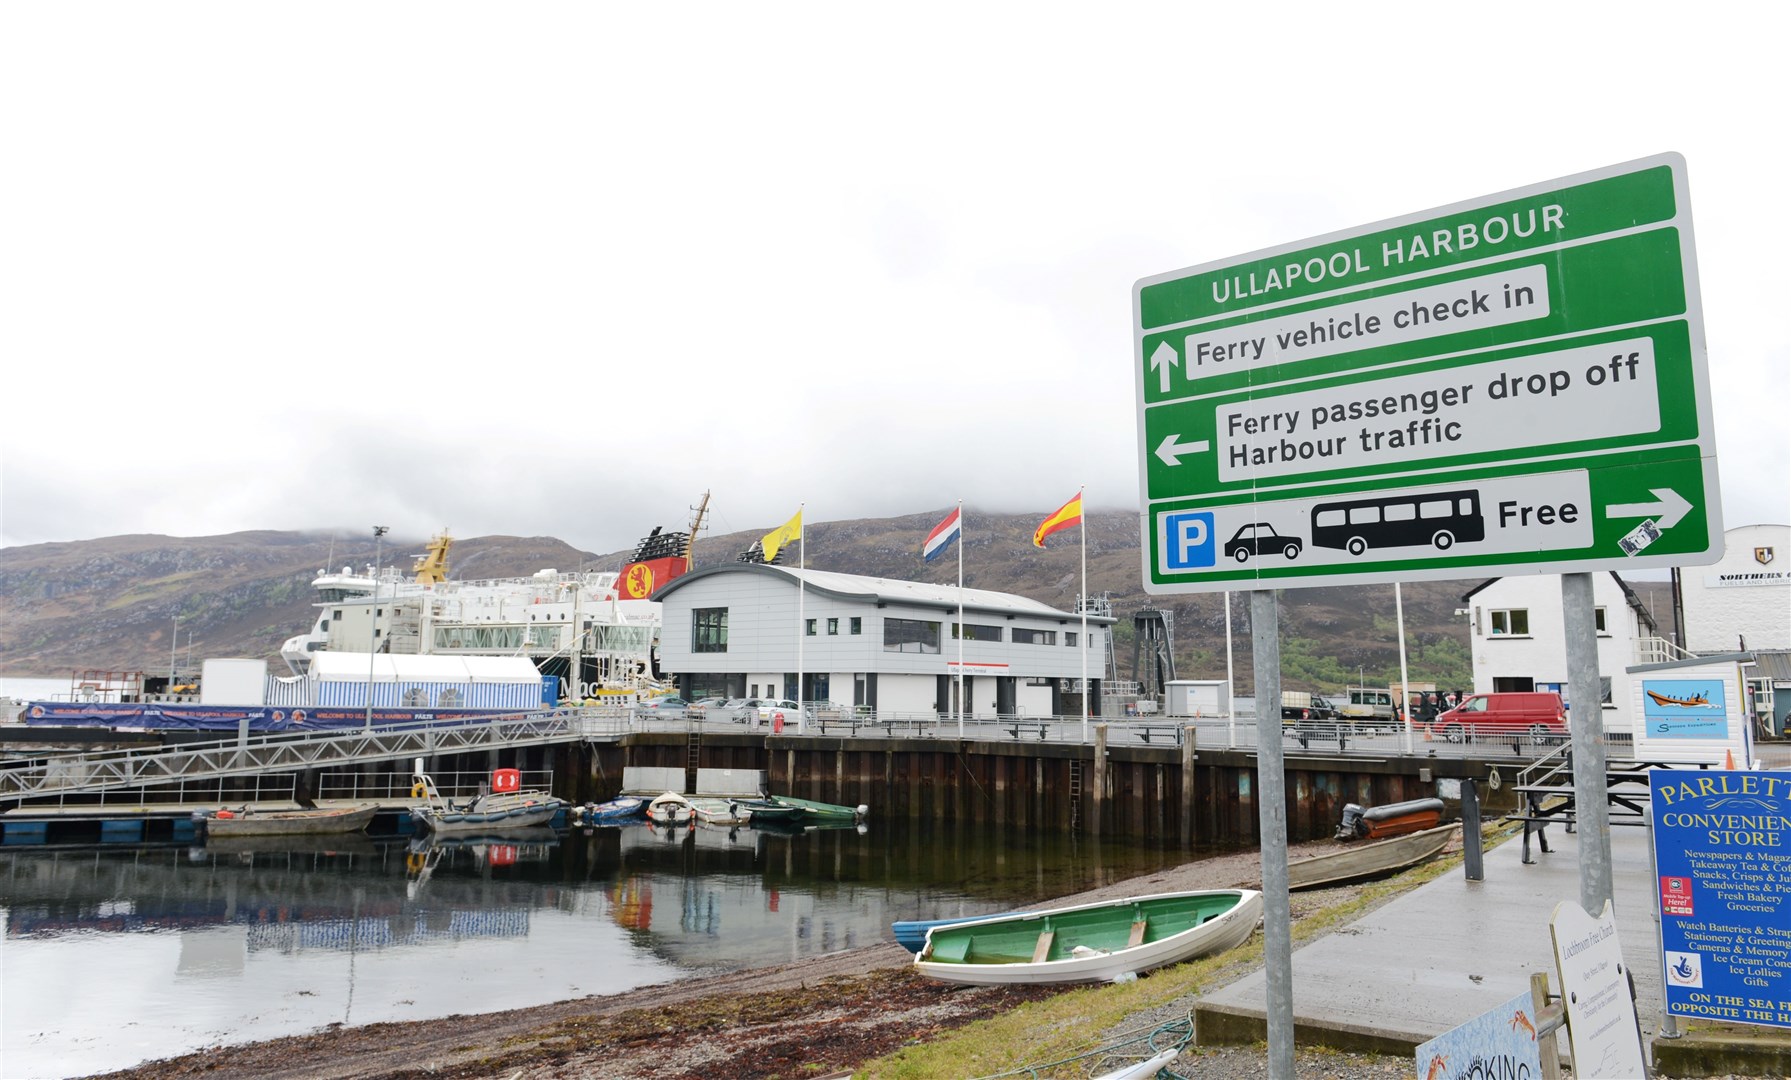 Ullapool Harbour is at the heart of the Wester Ross village with thousands of passengers passing through in normal times.